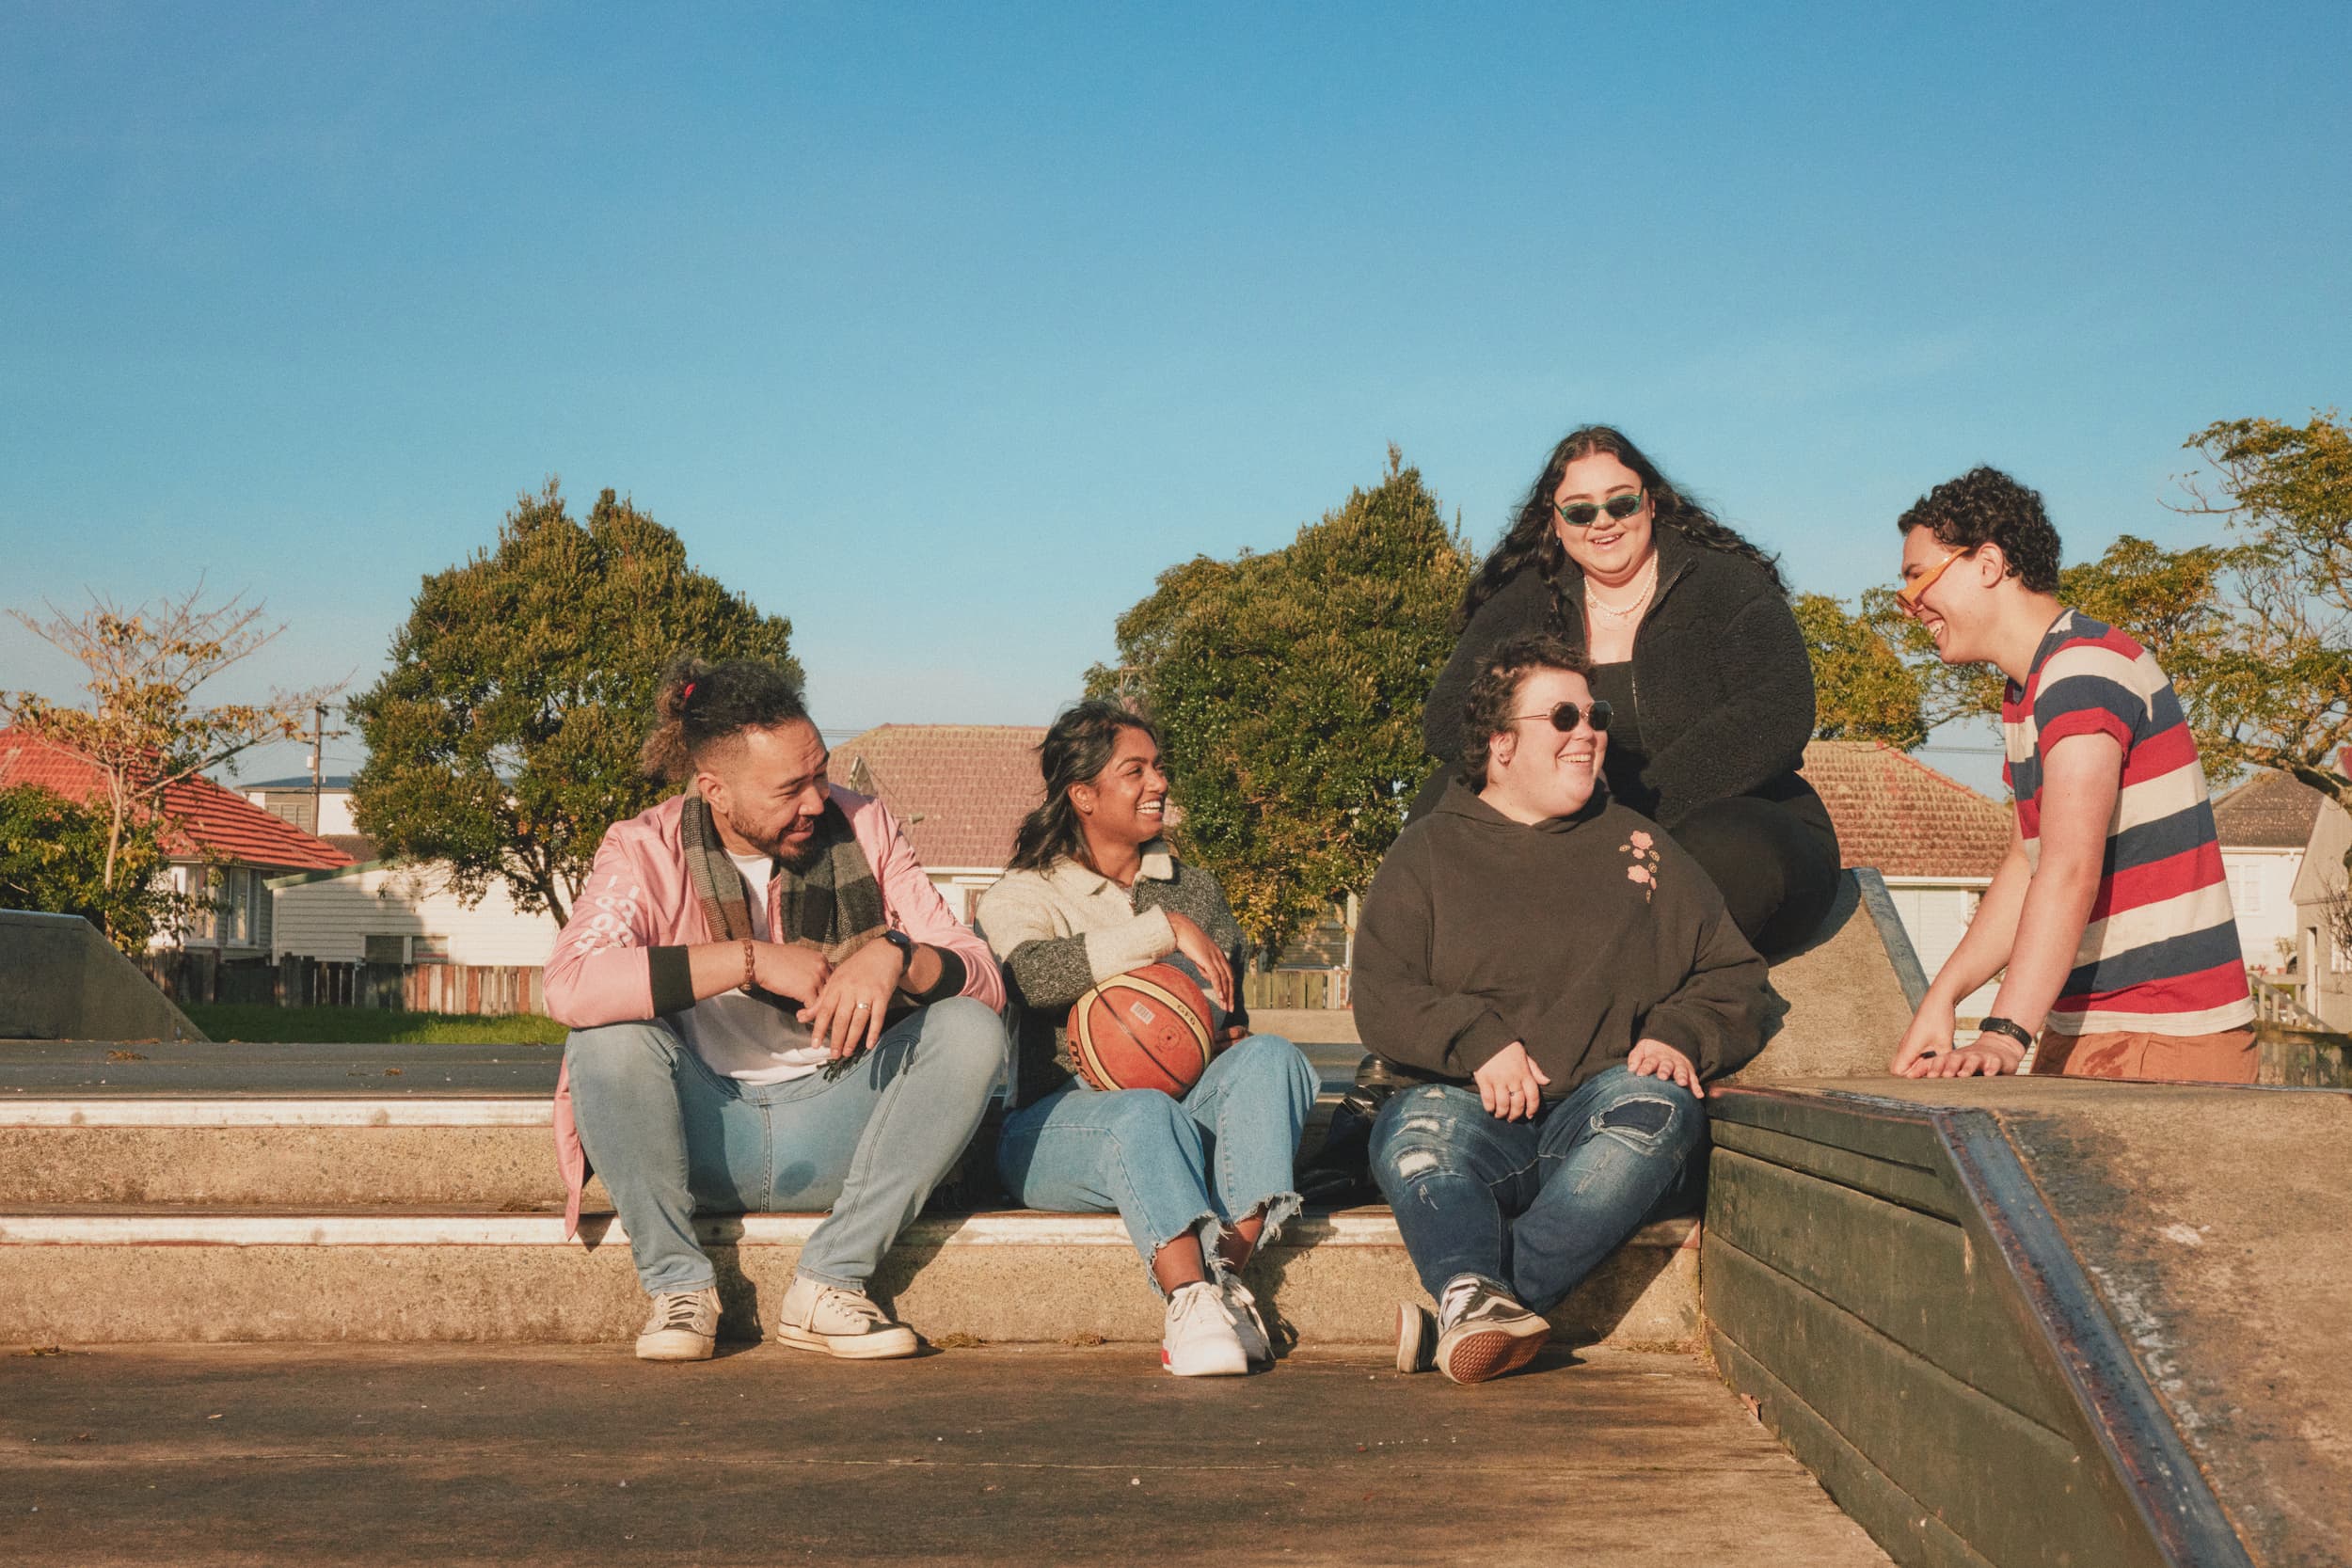 five young people sitting down at a basketball court talking